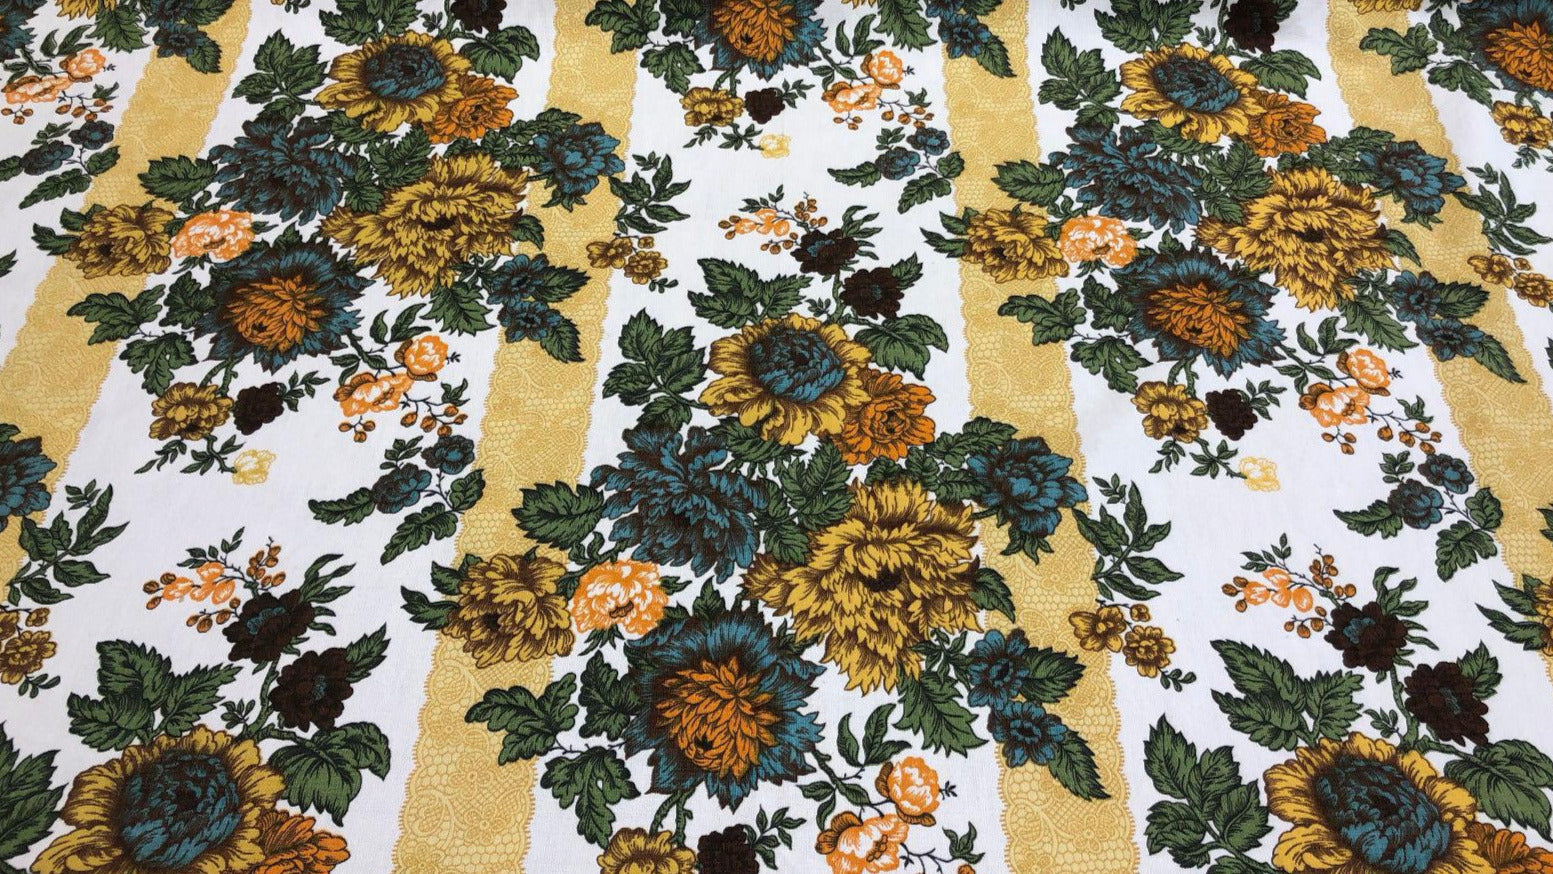 Floral Vintage Fabric by the Yard, Width 150cm /59 